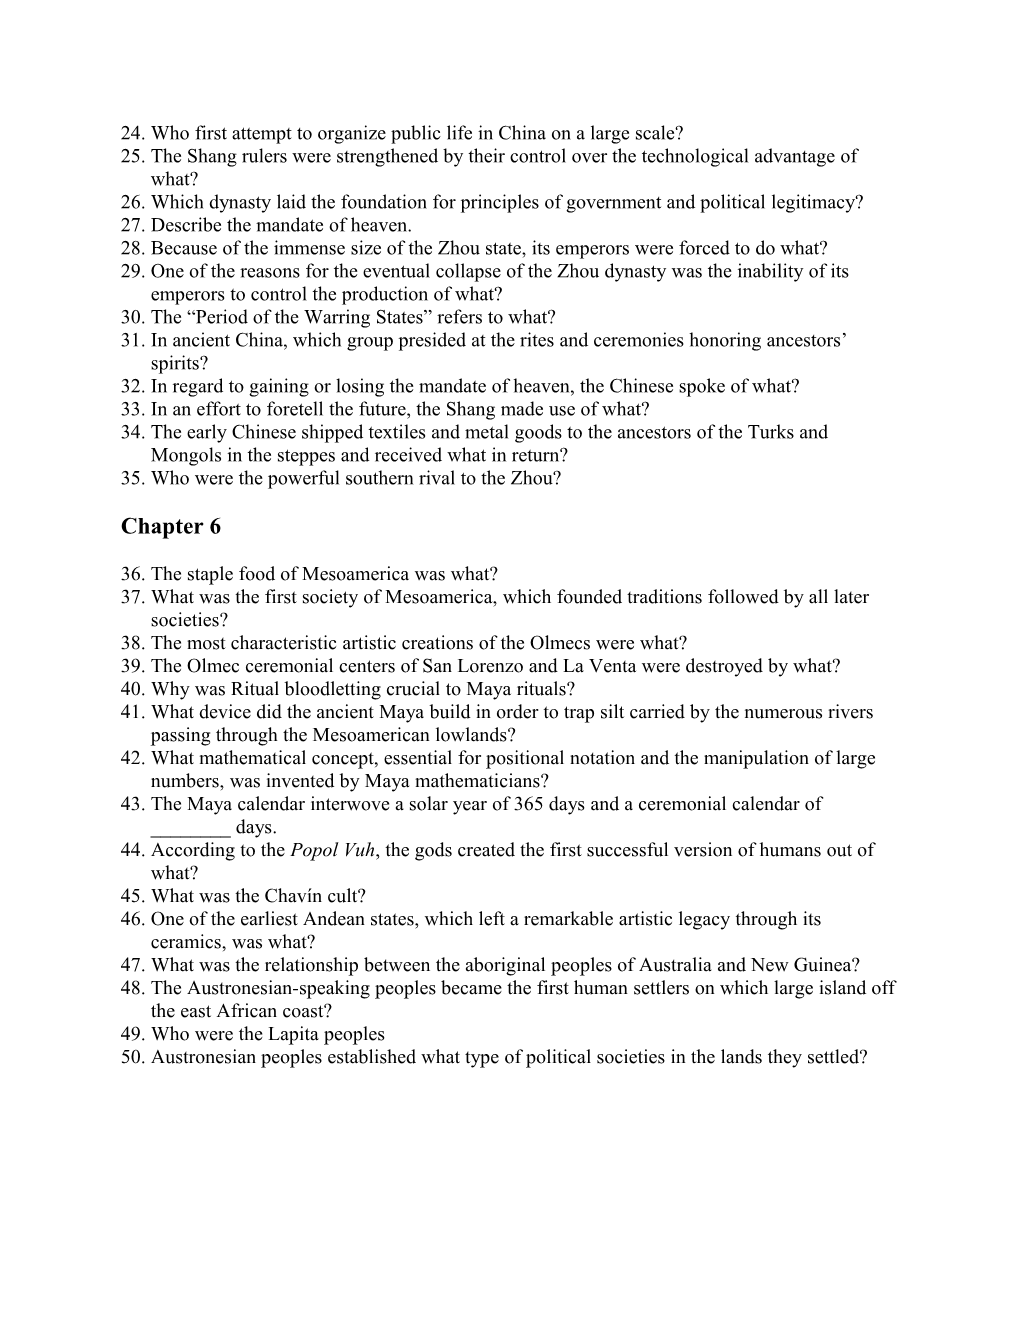 A.P. World History Unit 1 Test Study Guide